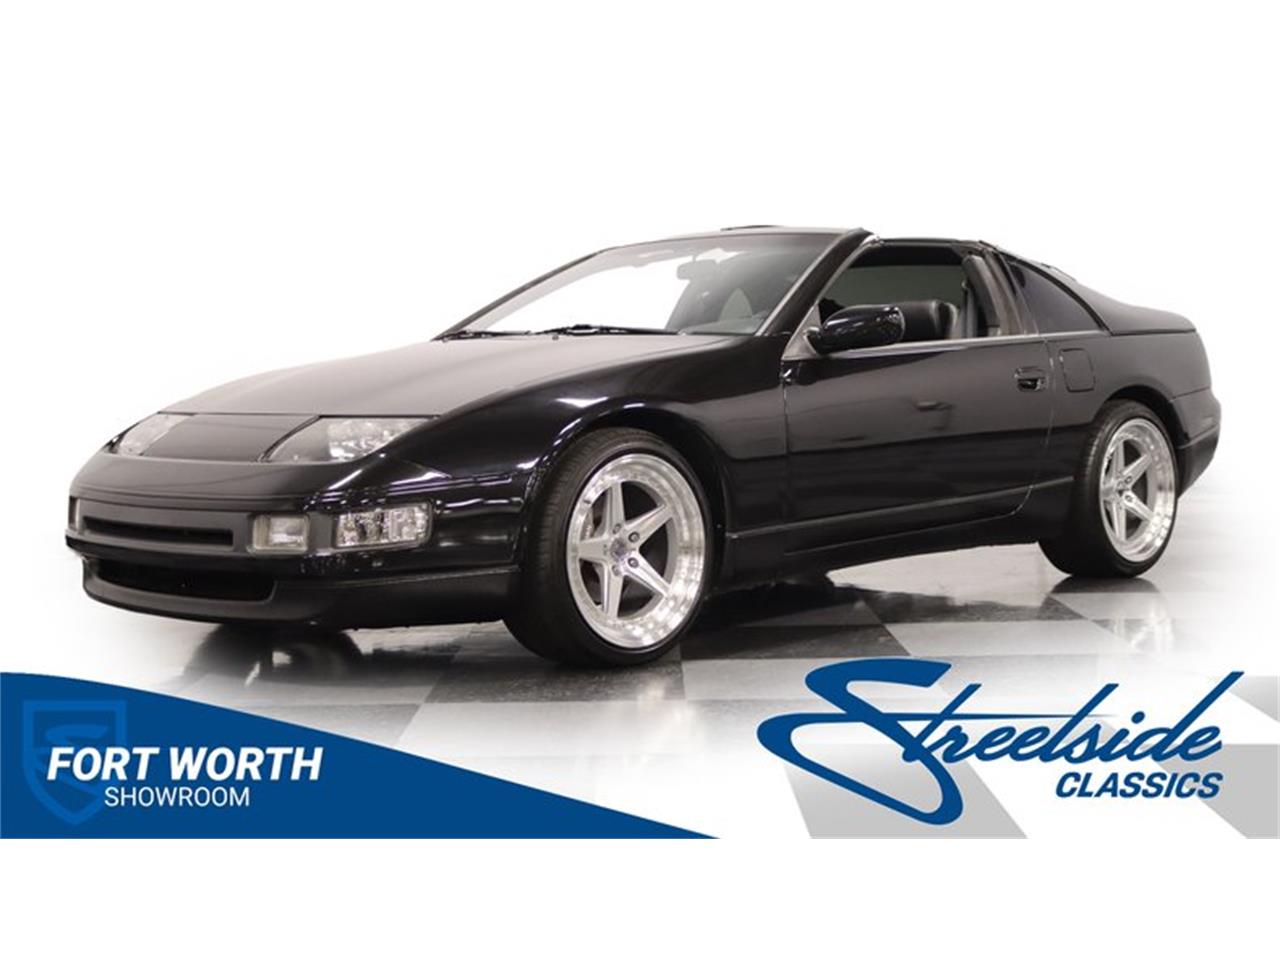 For Sale: 1990 Nissan 300ZX in Ft Worth, Texas for sale in Fort Worth, TX